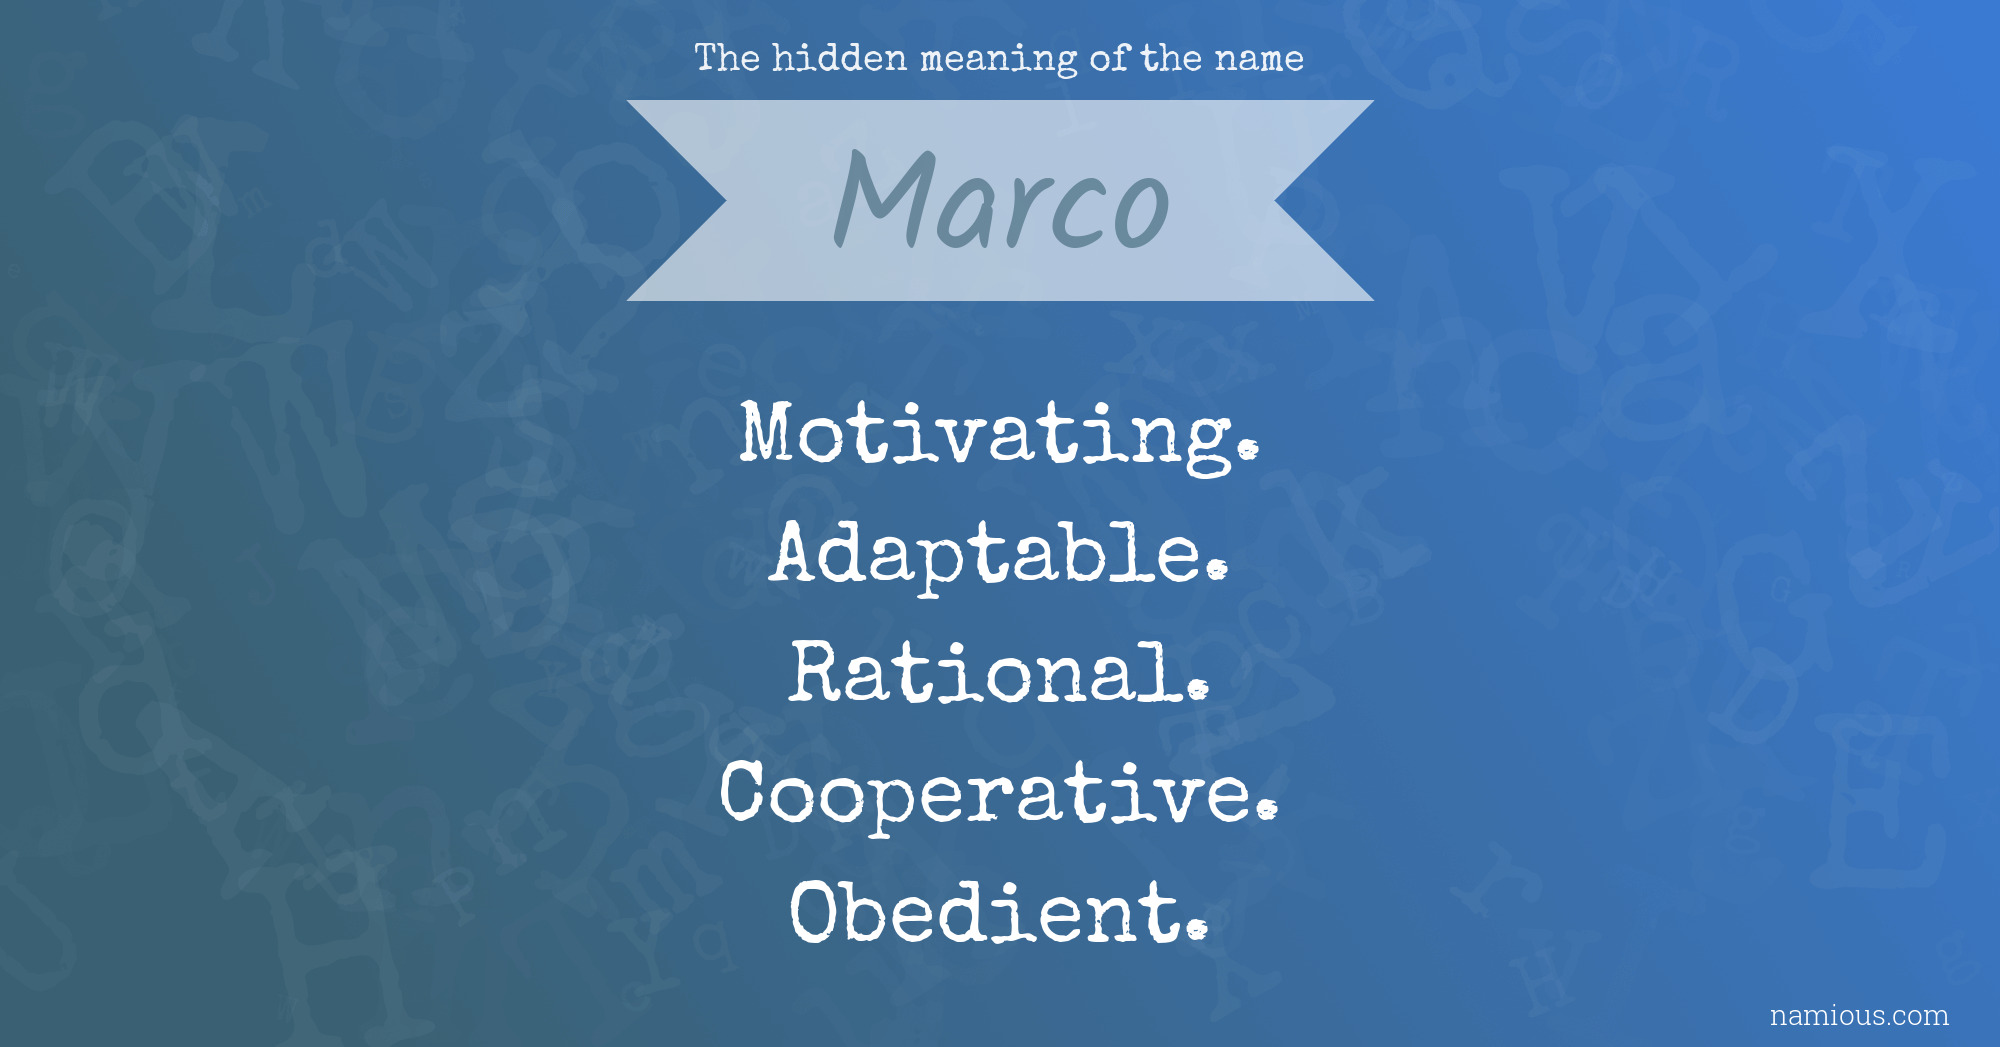 The hidden meaning of the name Marco